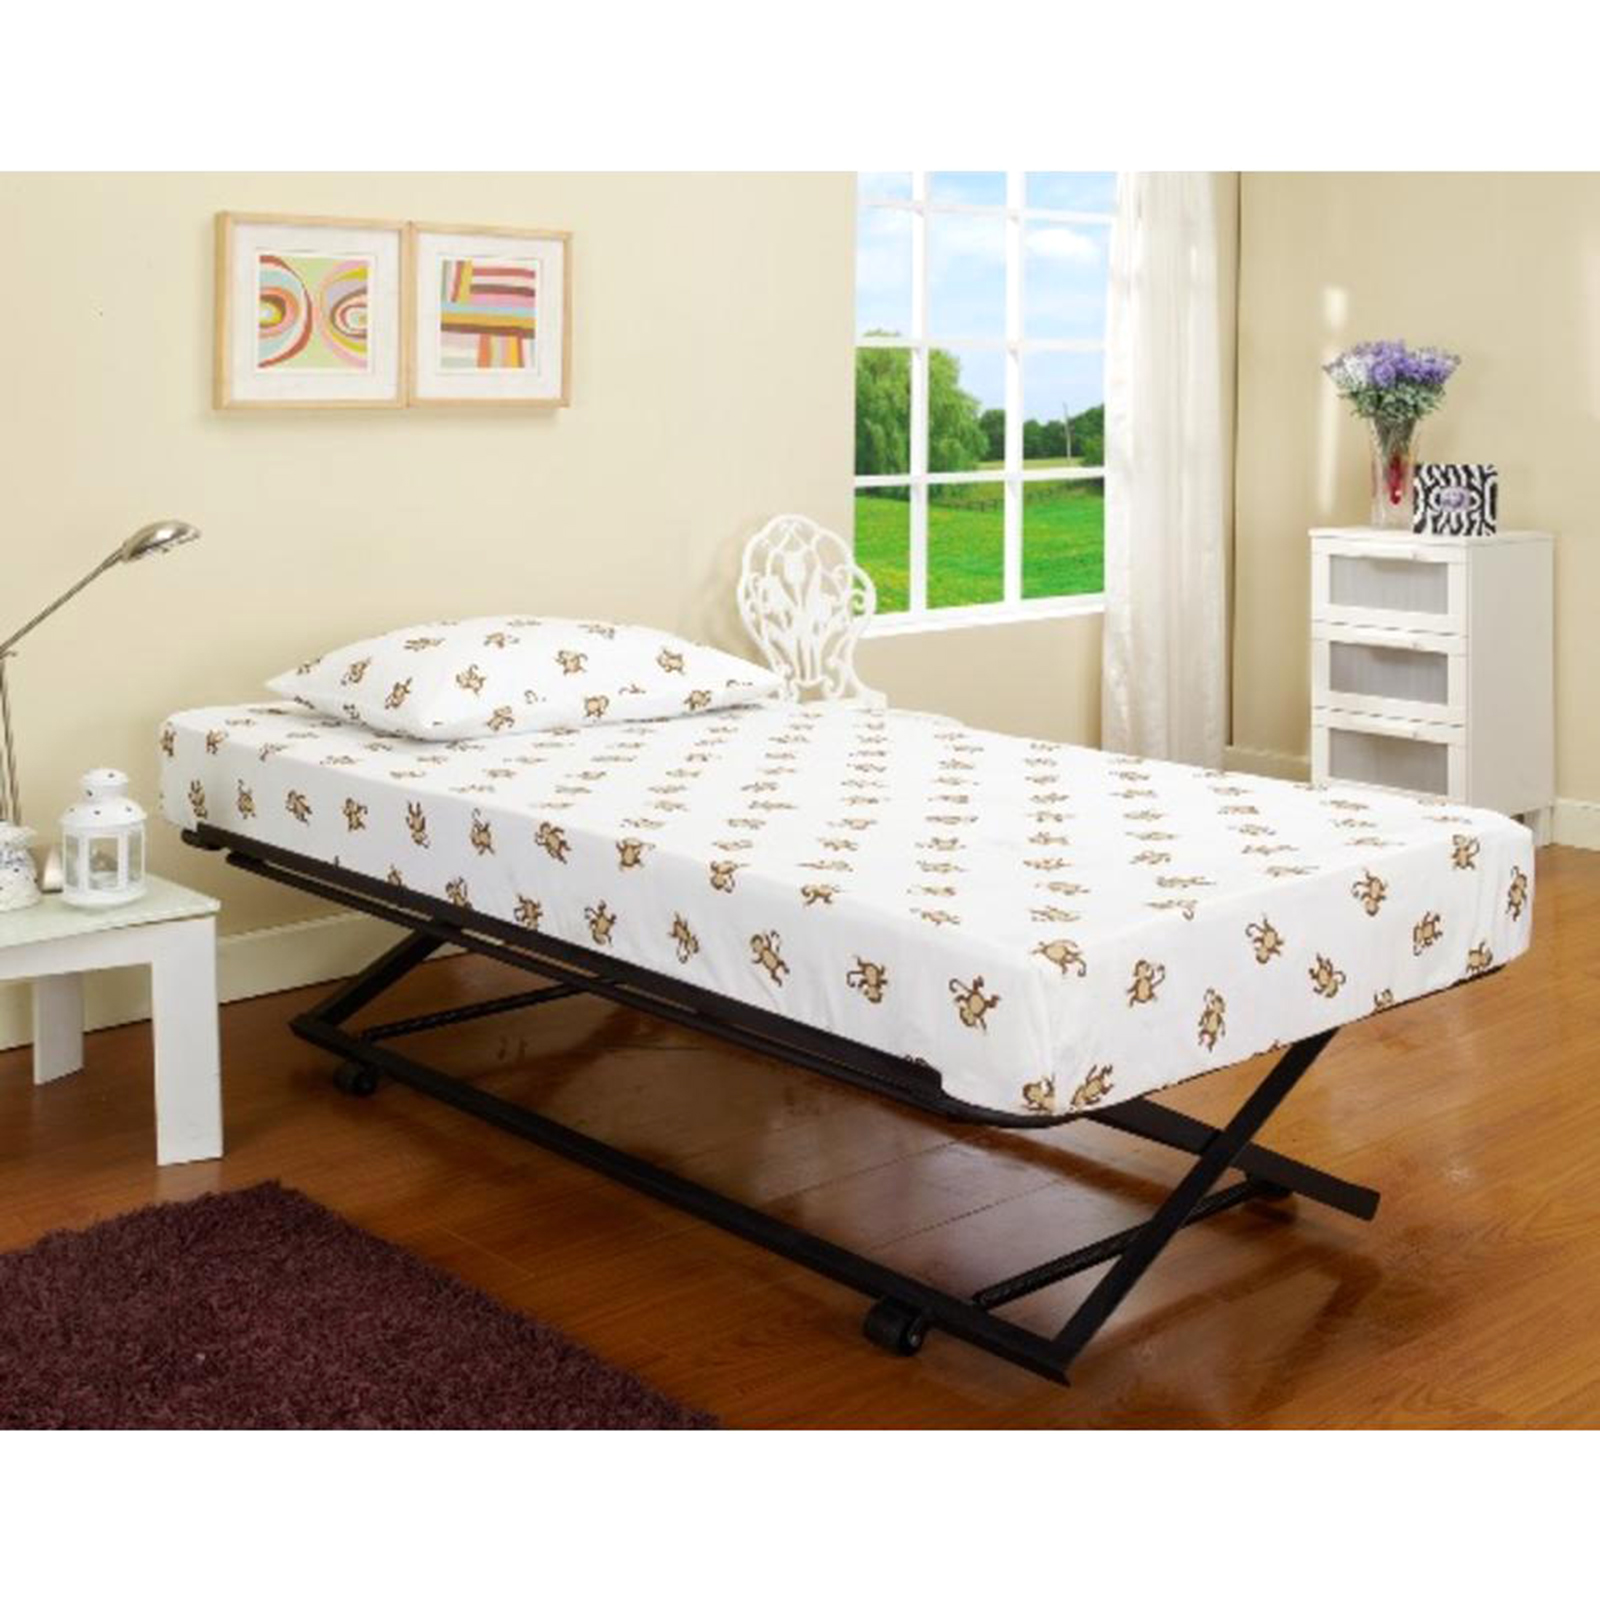 Inroom Furniture Designs B39-3 Rollout Pop Up Trundle Bed